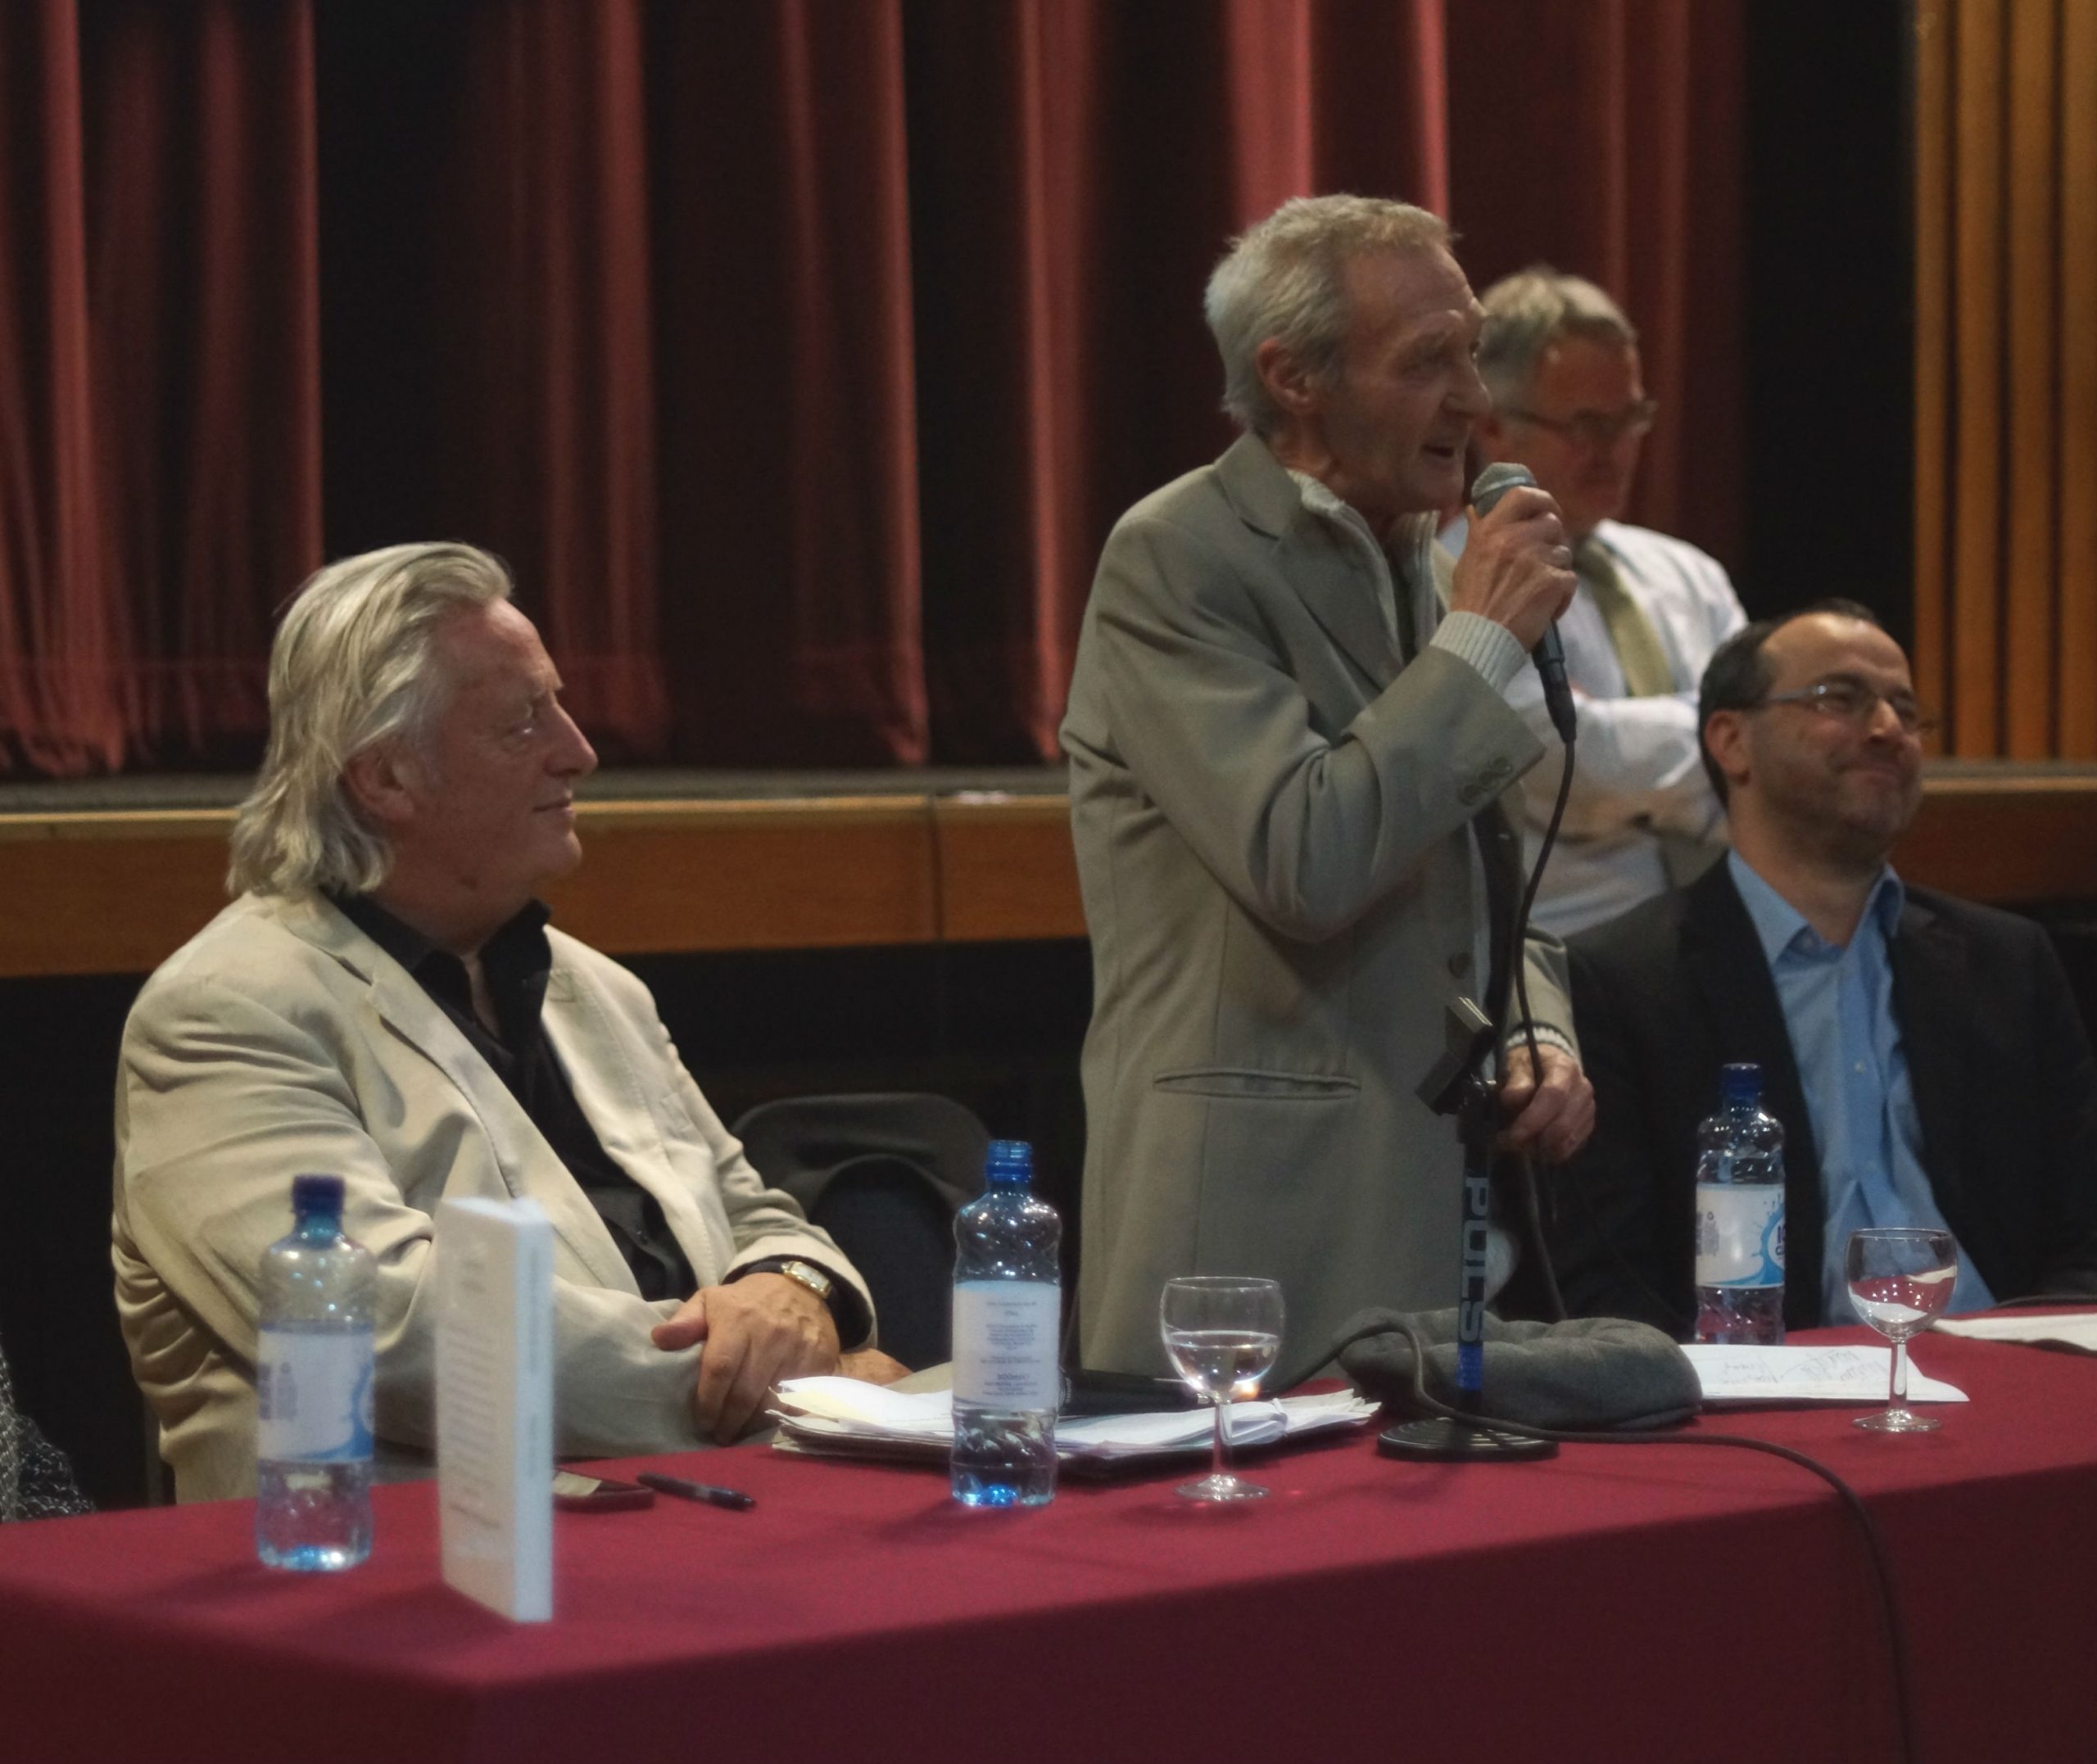 Paddy Hill, one of the Birmingham Six, speaking at the lecture